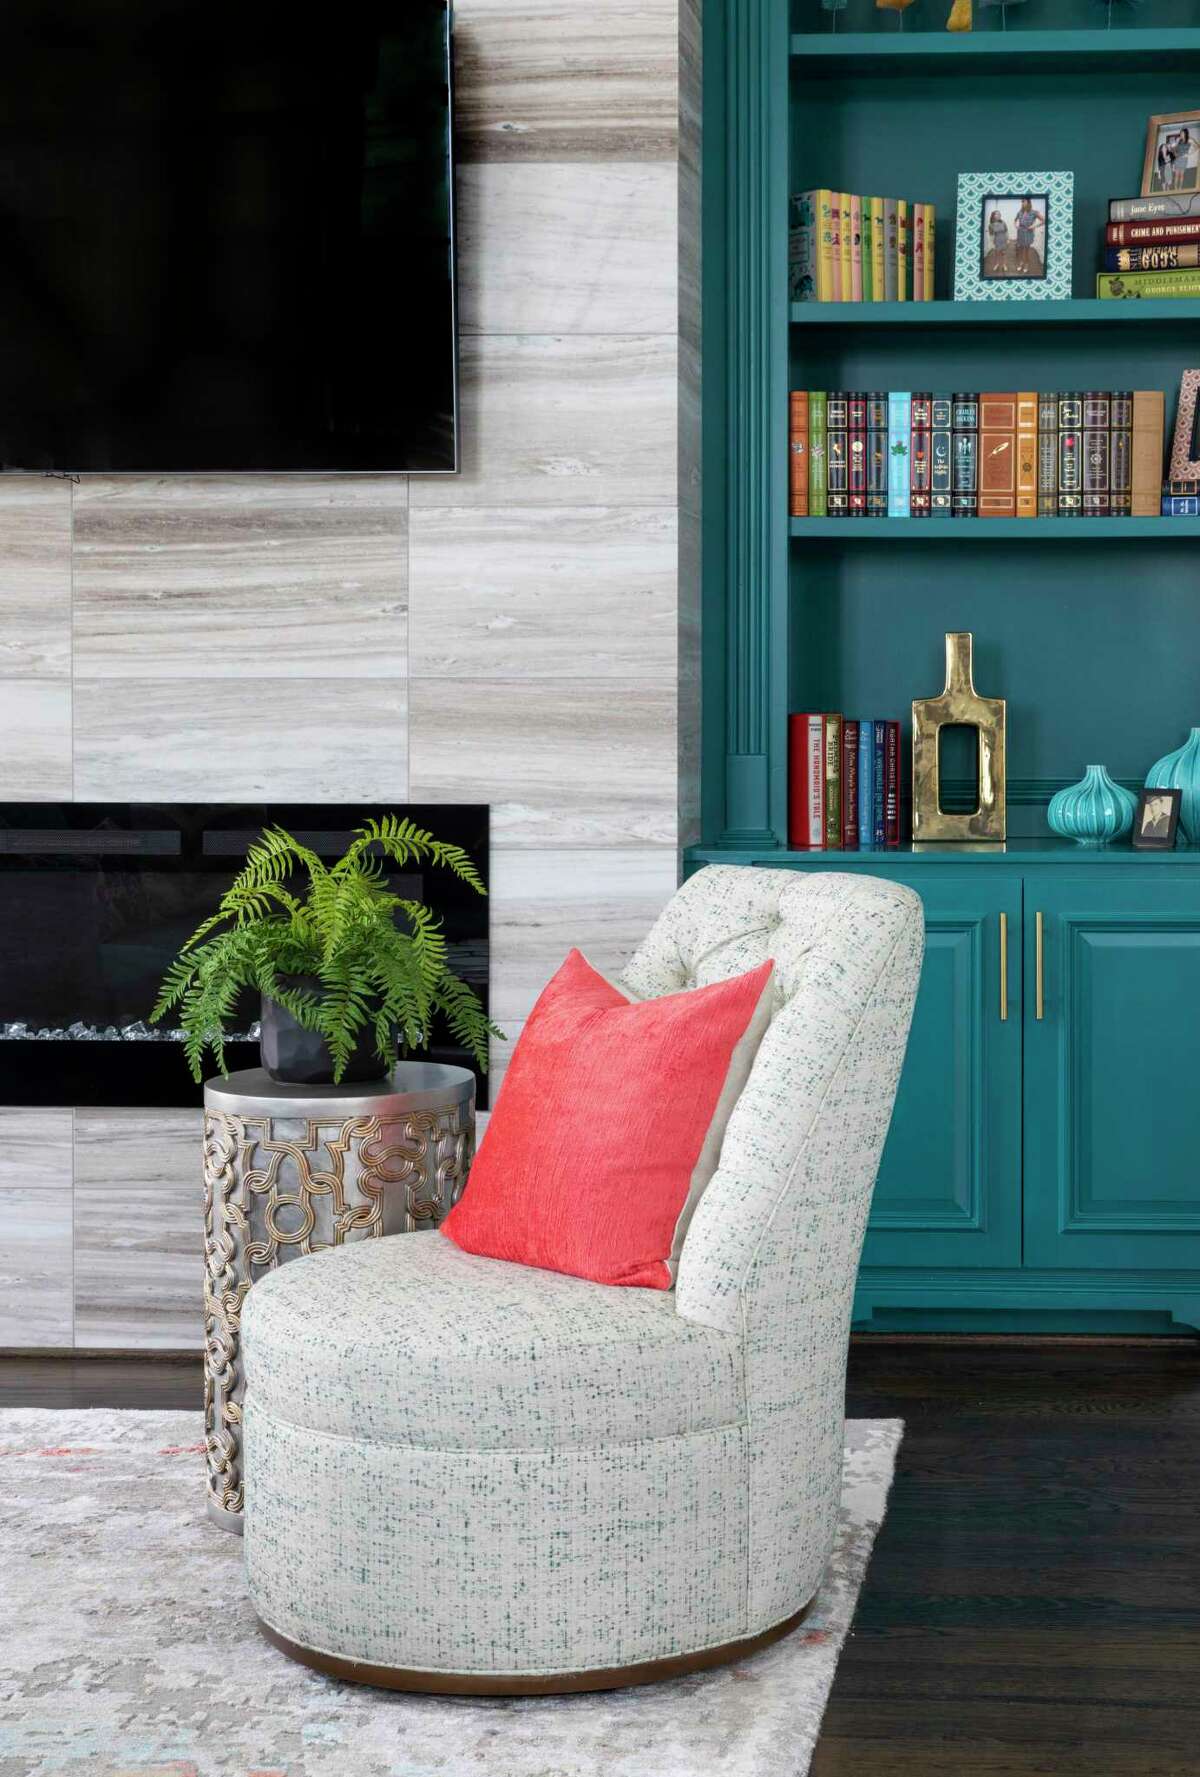 Curved or rounded furniture and bold colors will be a popular trend in homes in 2022, says Pamela O'Brien of Pamela Hope Designs, an interior designer based in Houston.  In this house there is a round swivel chair in front of a light blue-green lacquered bookcase.